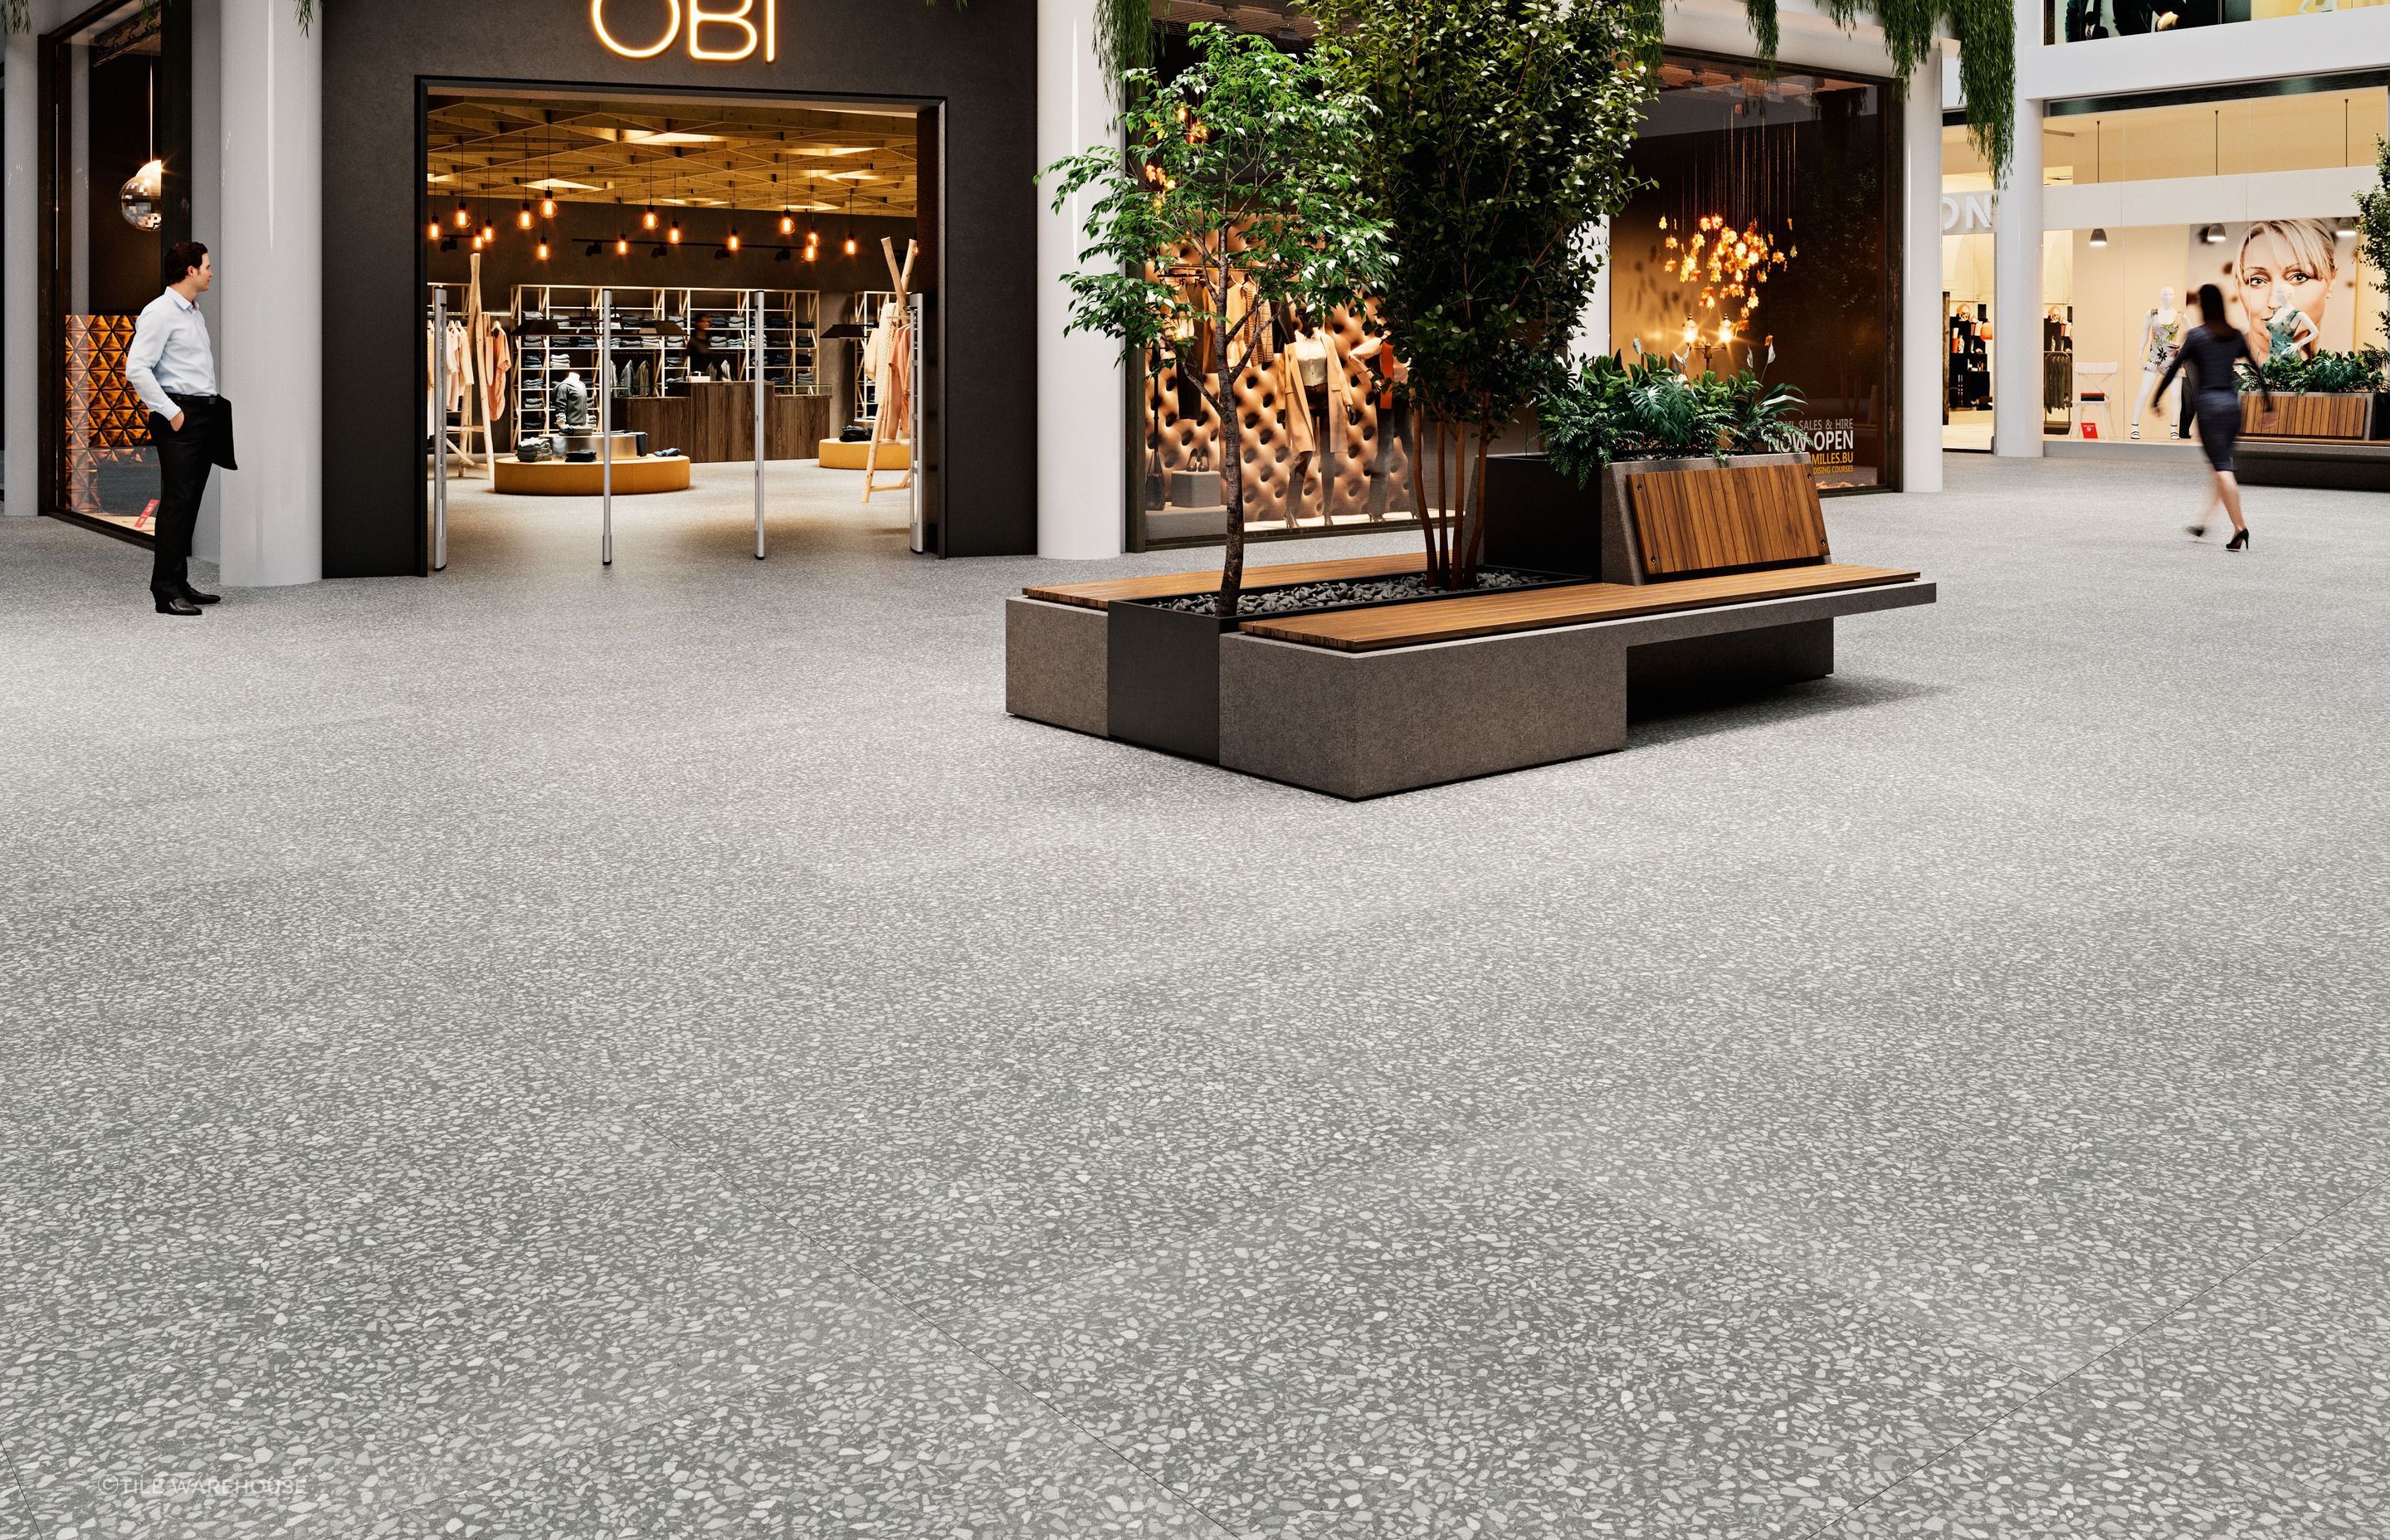 OBI is a contemporary floor tile in a large format, perfect for high traffic areas. Timeless terrazzo tile that offers a distinctive look in size 1000 x 1000mm.